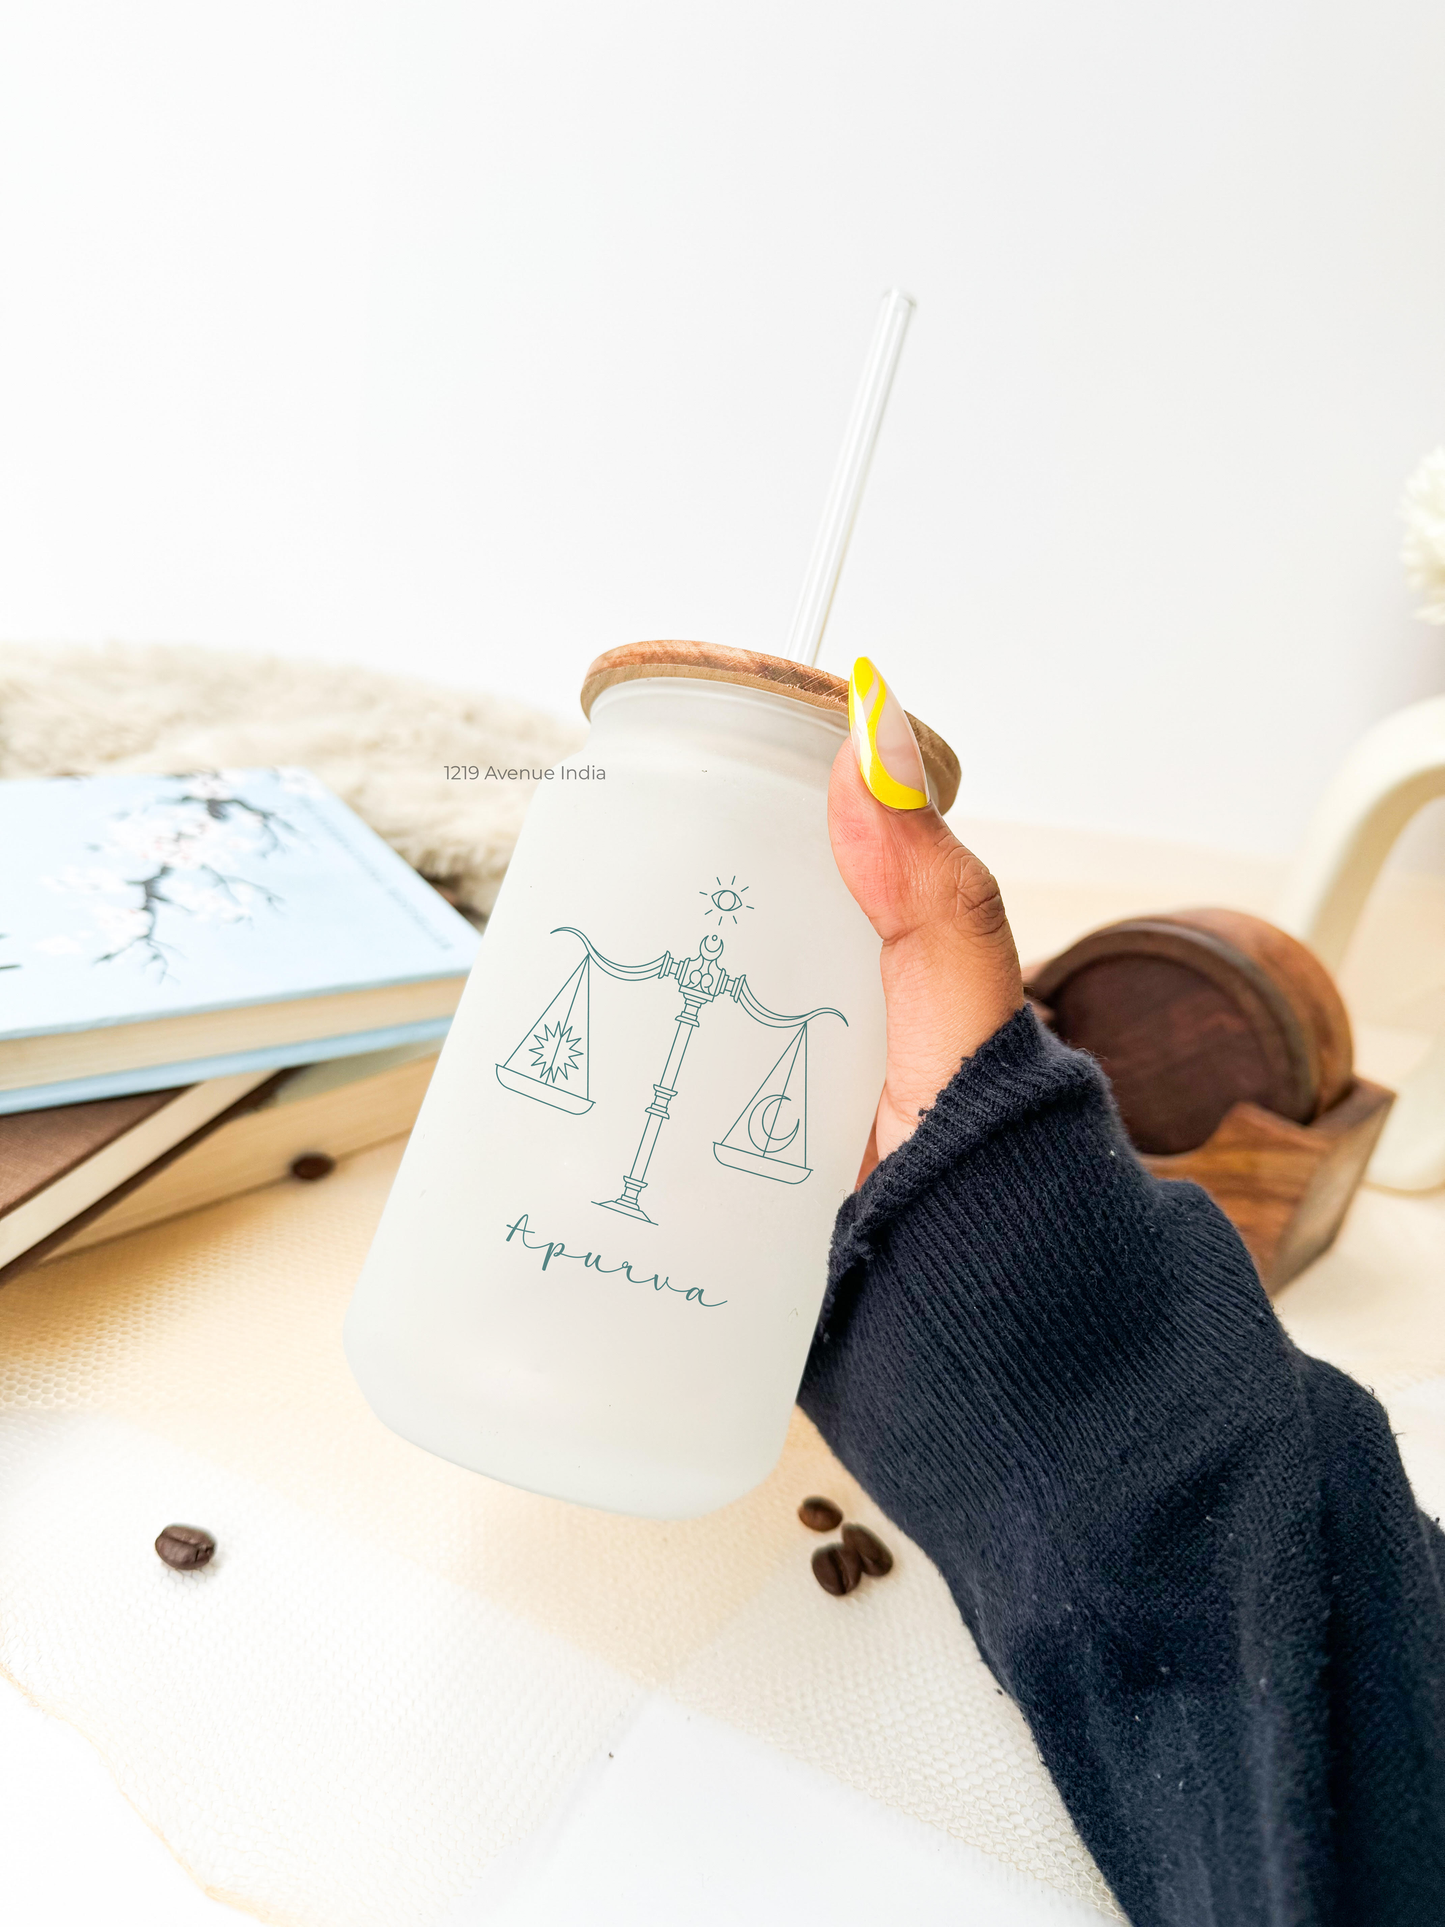 Personalized Frosted Can Sipper 500ml|Zodiac with name| Coffee Glass Tumbler with straw and lid 22oz